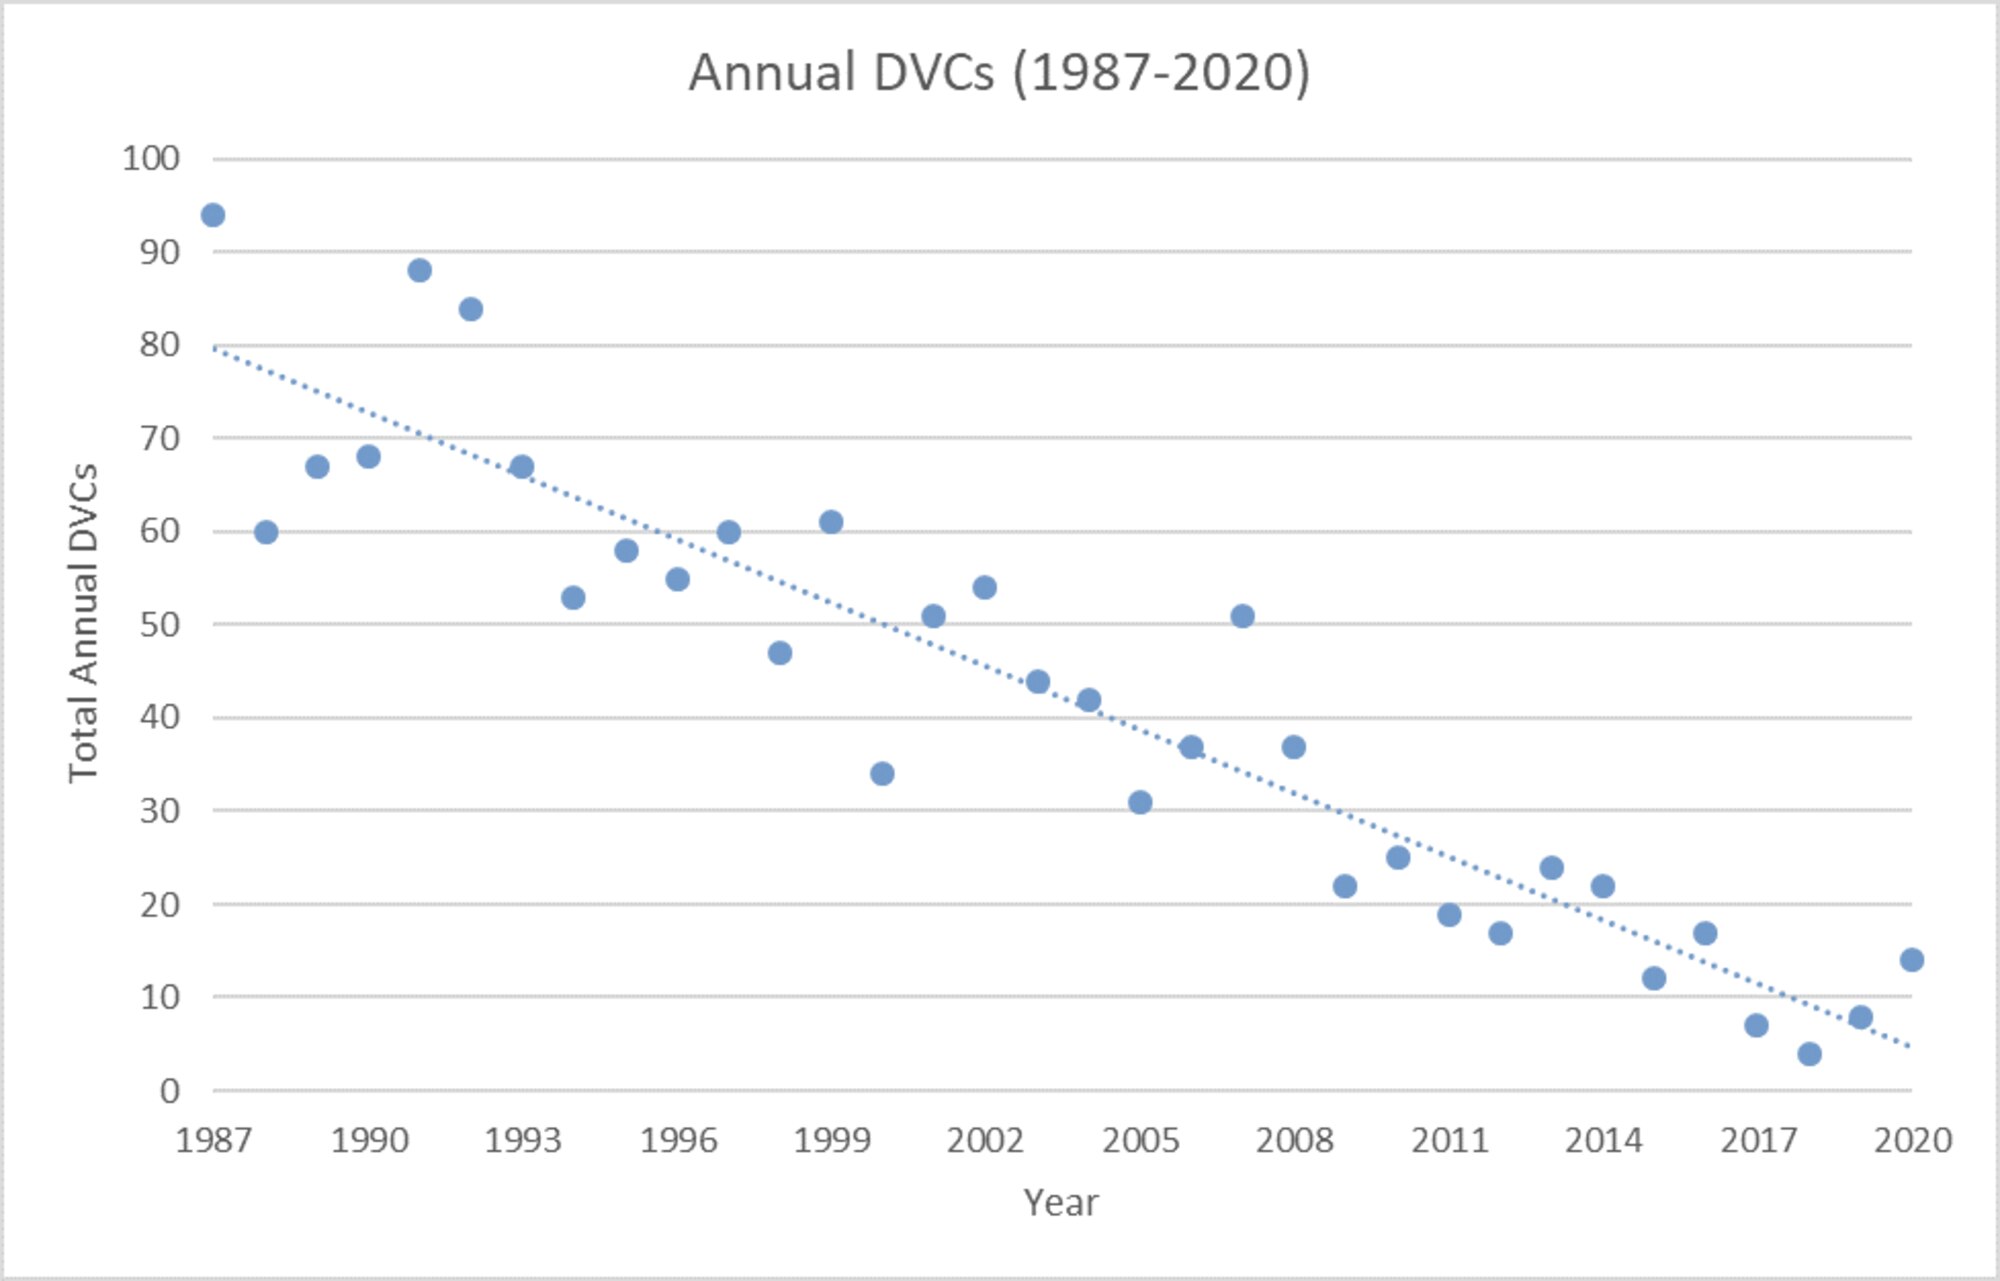 Deer vehicle collision, or DVC, data has been collected on Arnold Air Force Base since 1987. While the risk has declined significantly over the years, based on this analysis using linear regression, the hazard of driving on roads in the presence of deer still remains. (Graphic contributed)